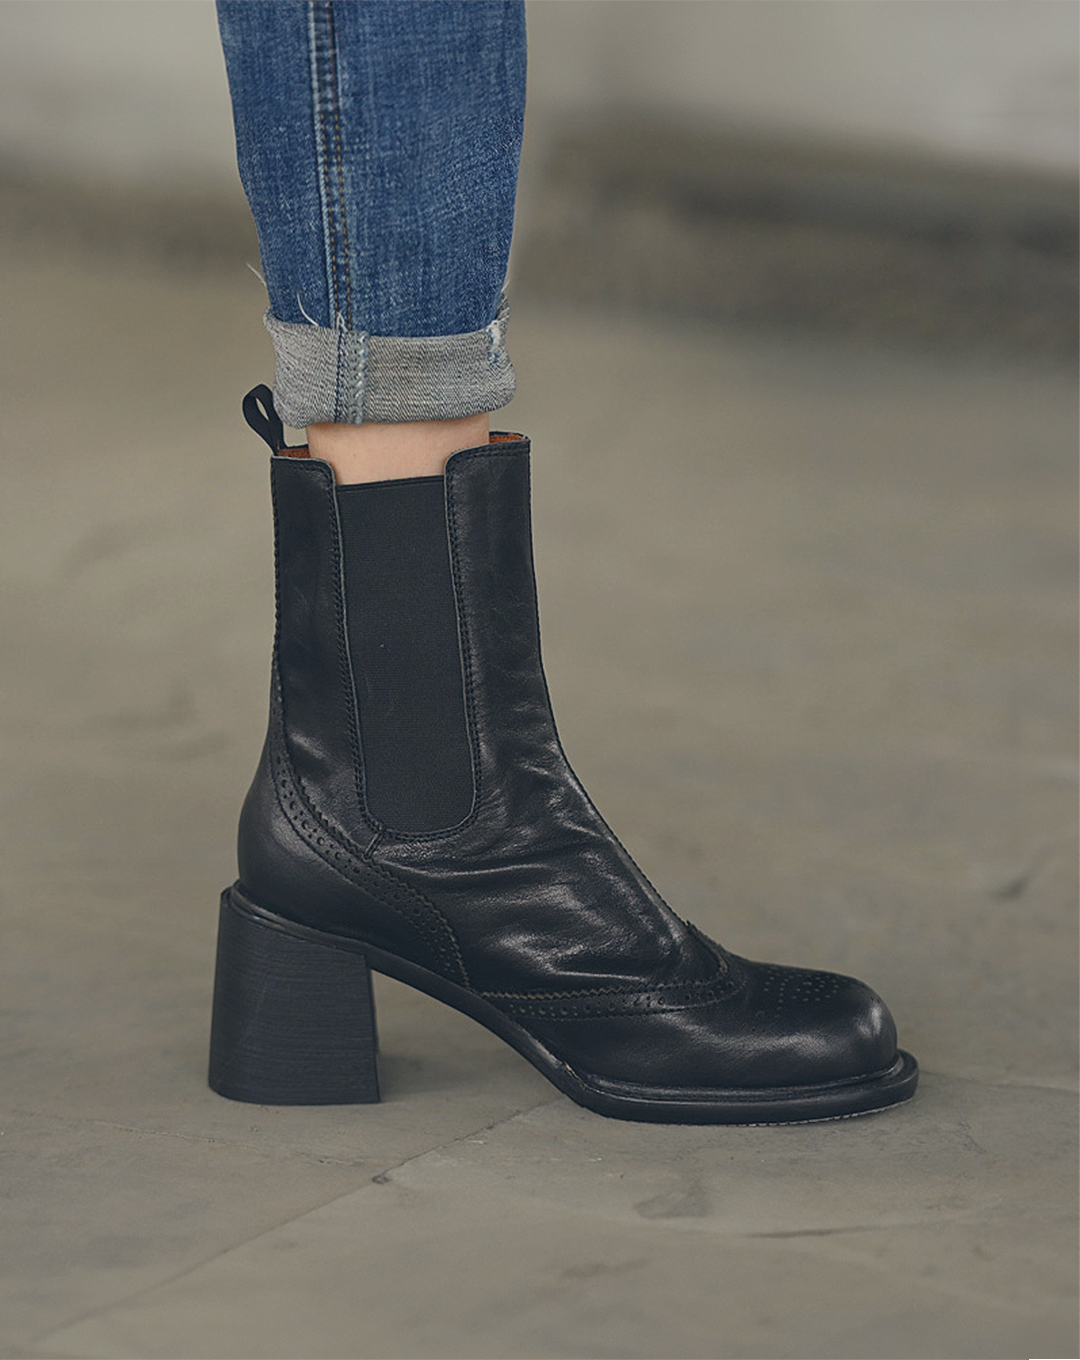 ♀Medallion Leather Chelsea Boots